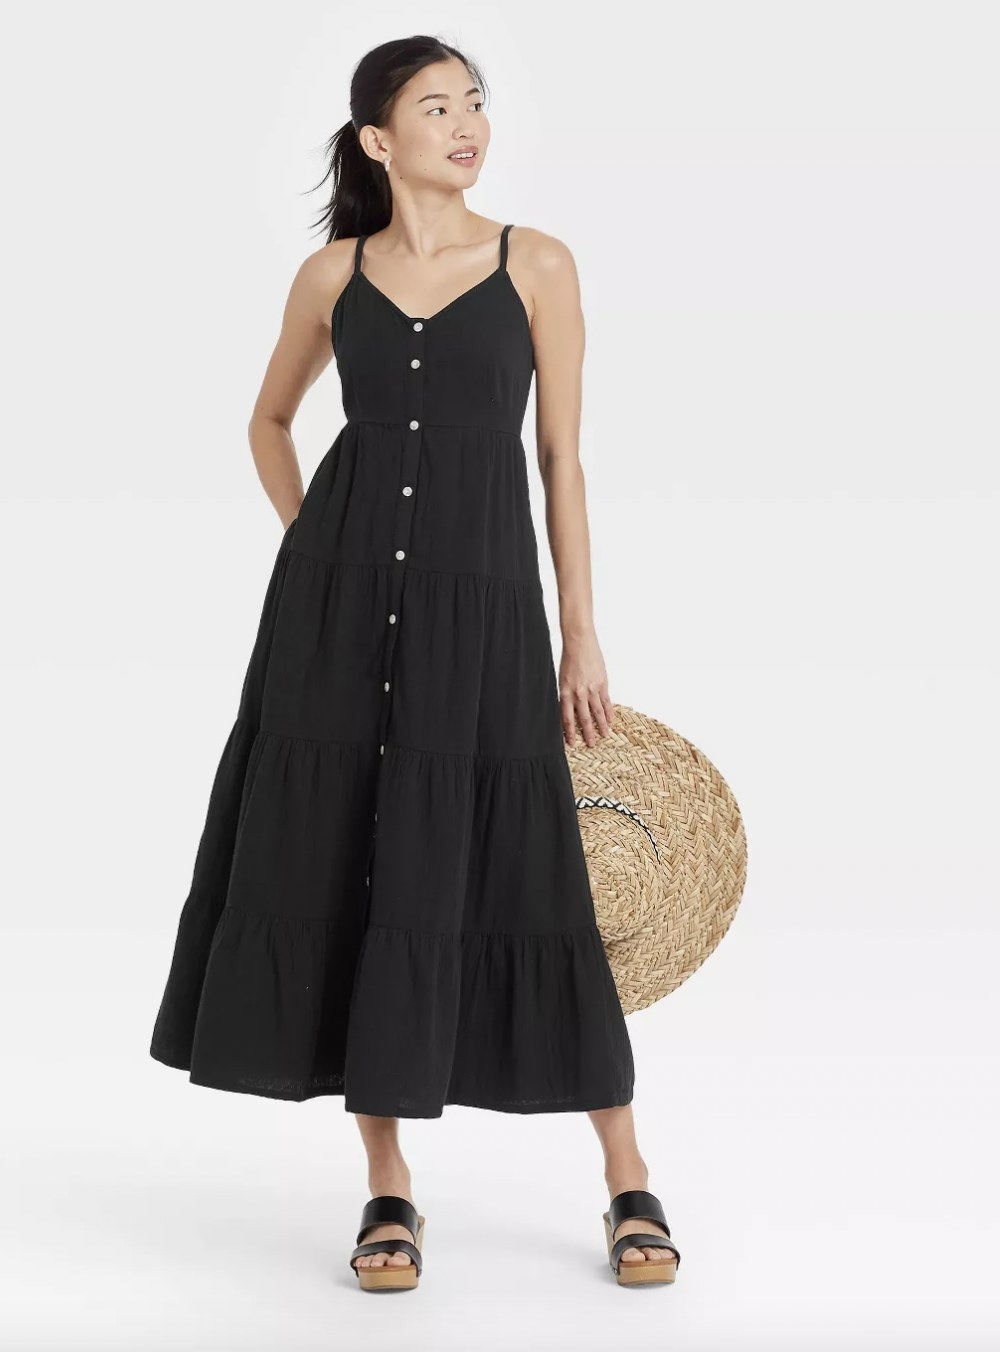 31 Dresses Under $50 From Target For Hot Weather